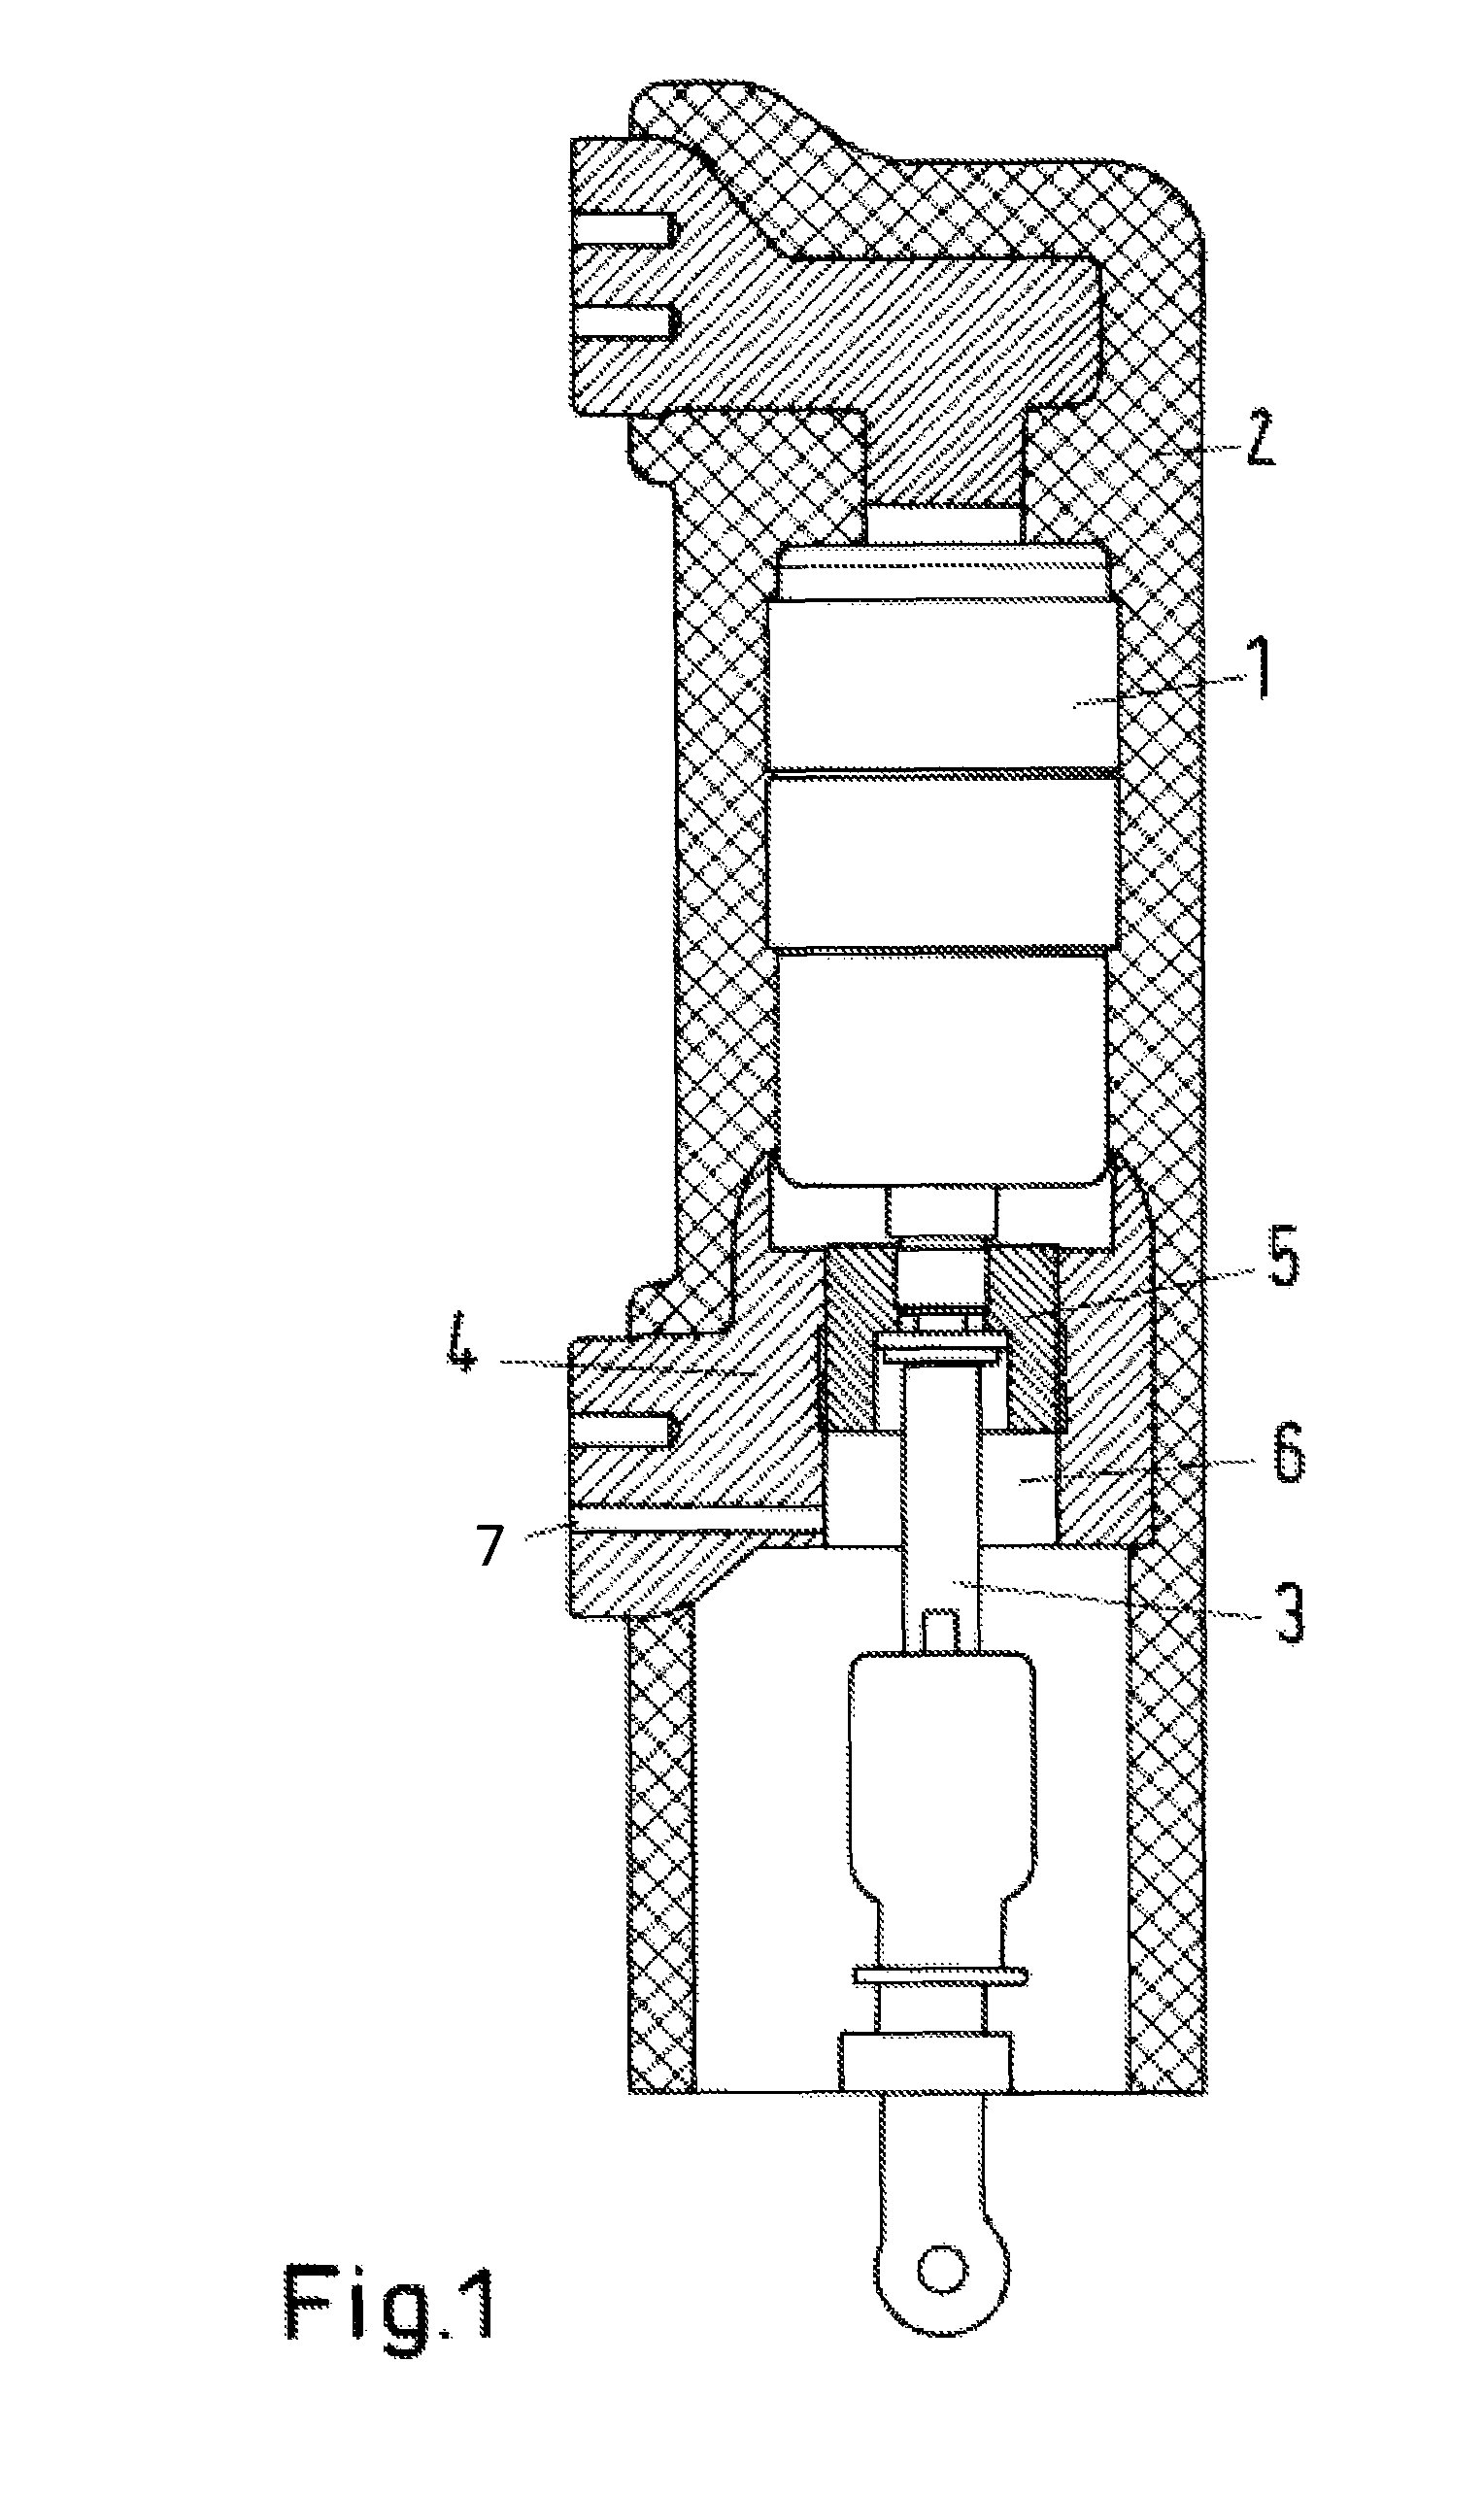 Pole part of a medium-voltage switching device